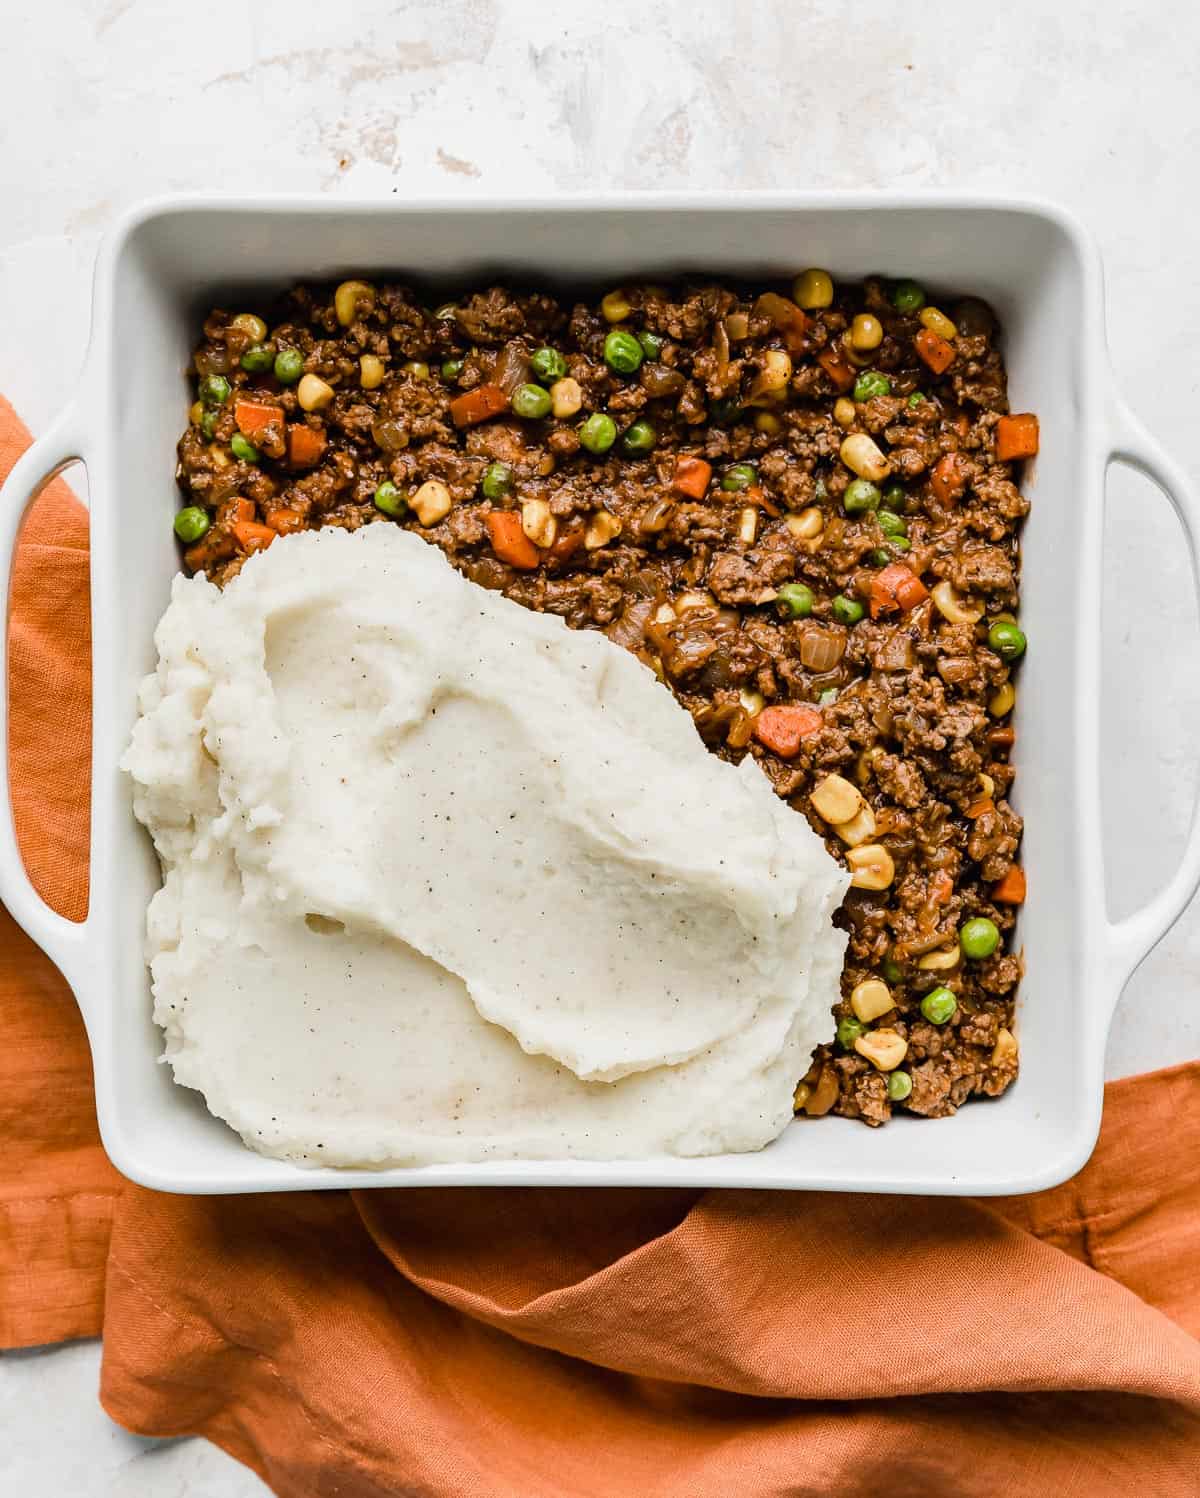 A square baking dish with Easy Shepherd's Pie beef mixture topped with a small portion of mashed potatoes in the bottom left corner of the dish.